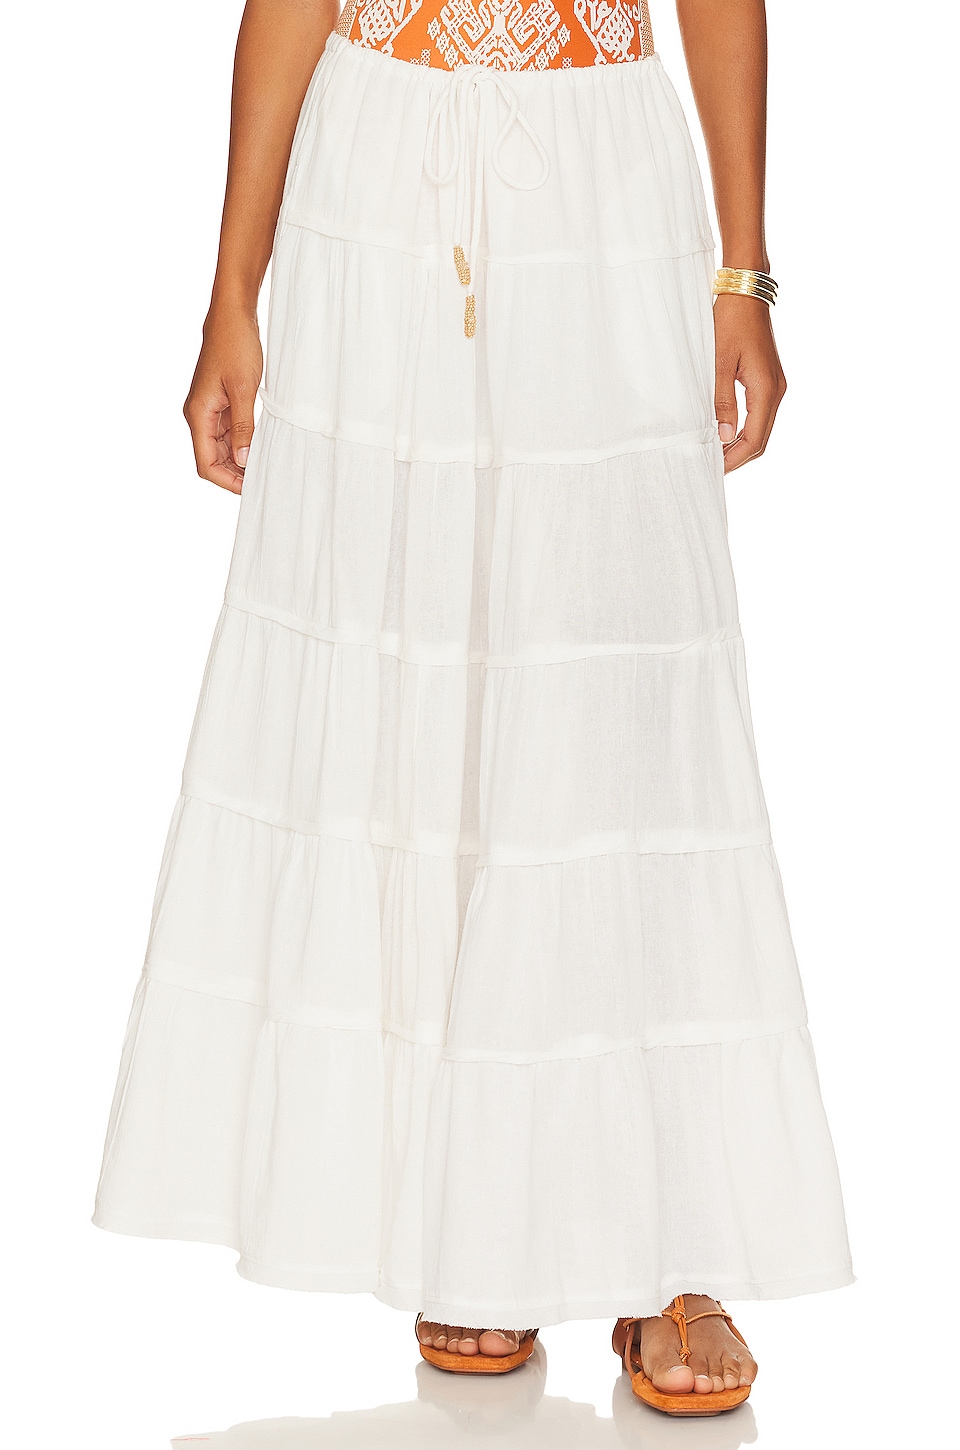 Free People Simply Smitten Maxi Skirt in Optic White | REVOLVE